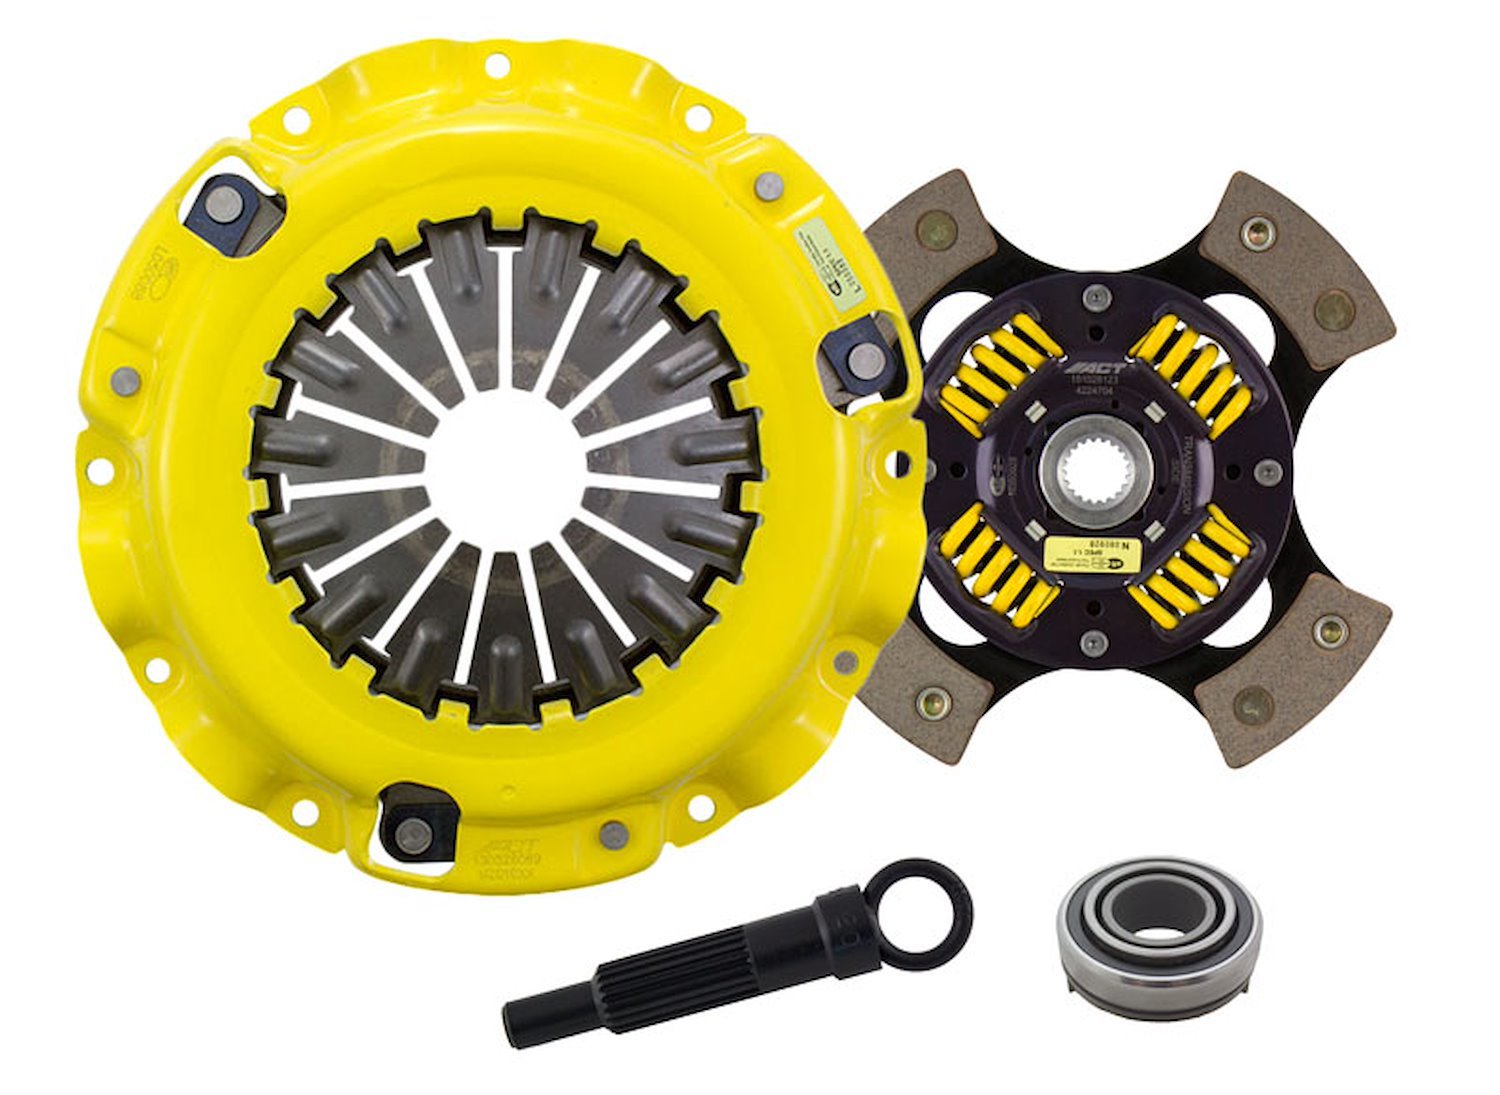 MaXX/Race Sprung 4-Pad Transmission Clutch Kit Fits Select Chrysler/Dodge/Eagle/Mitsubishi/Plymouth